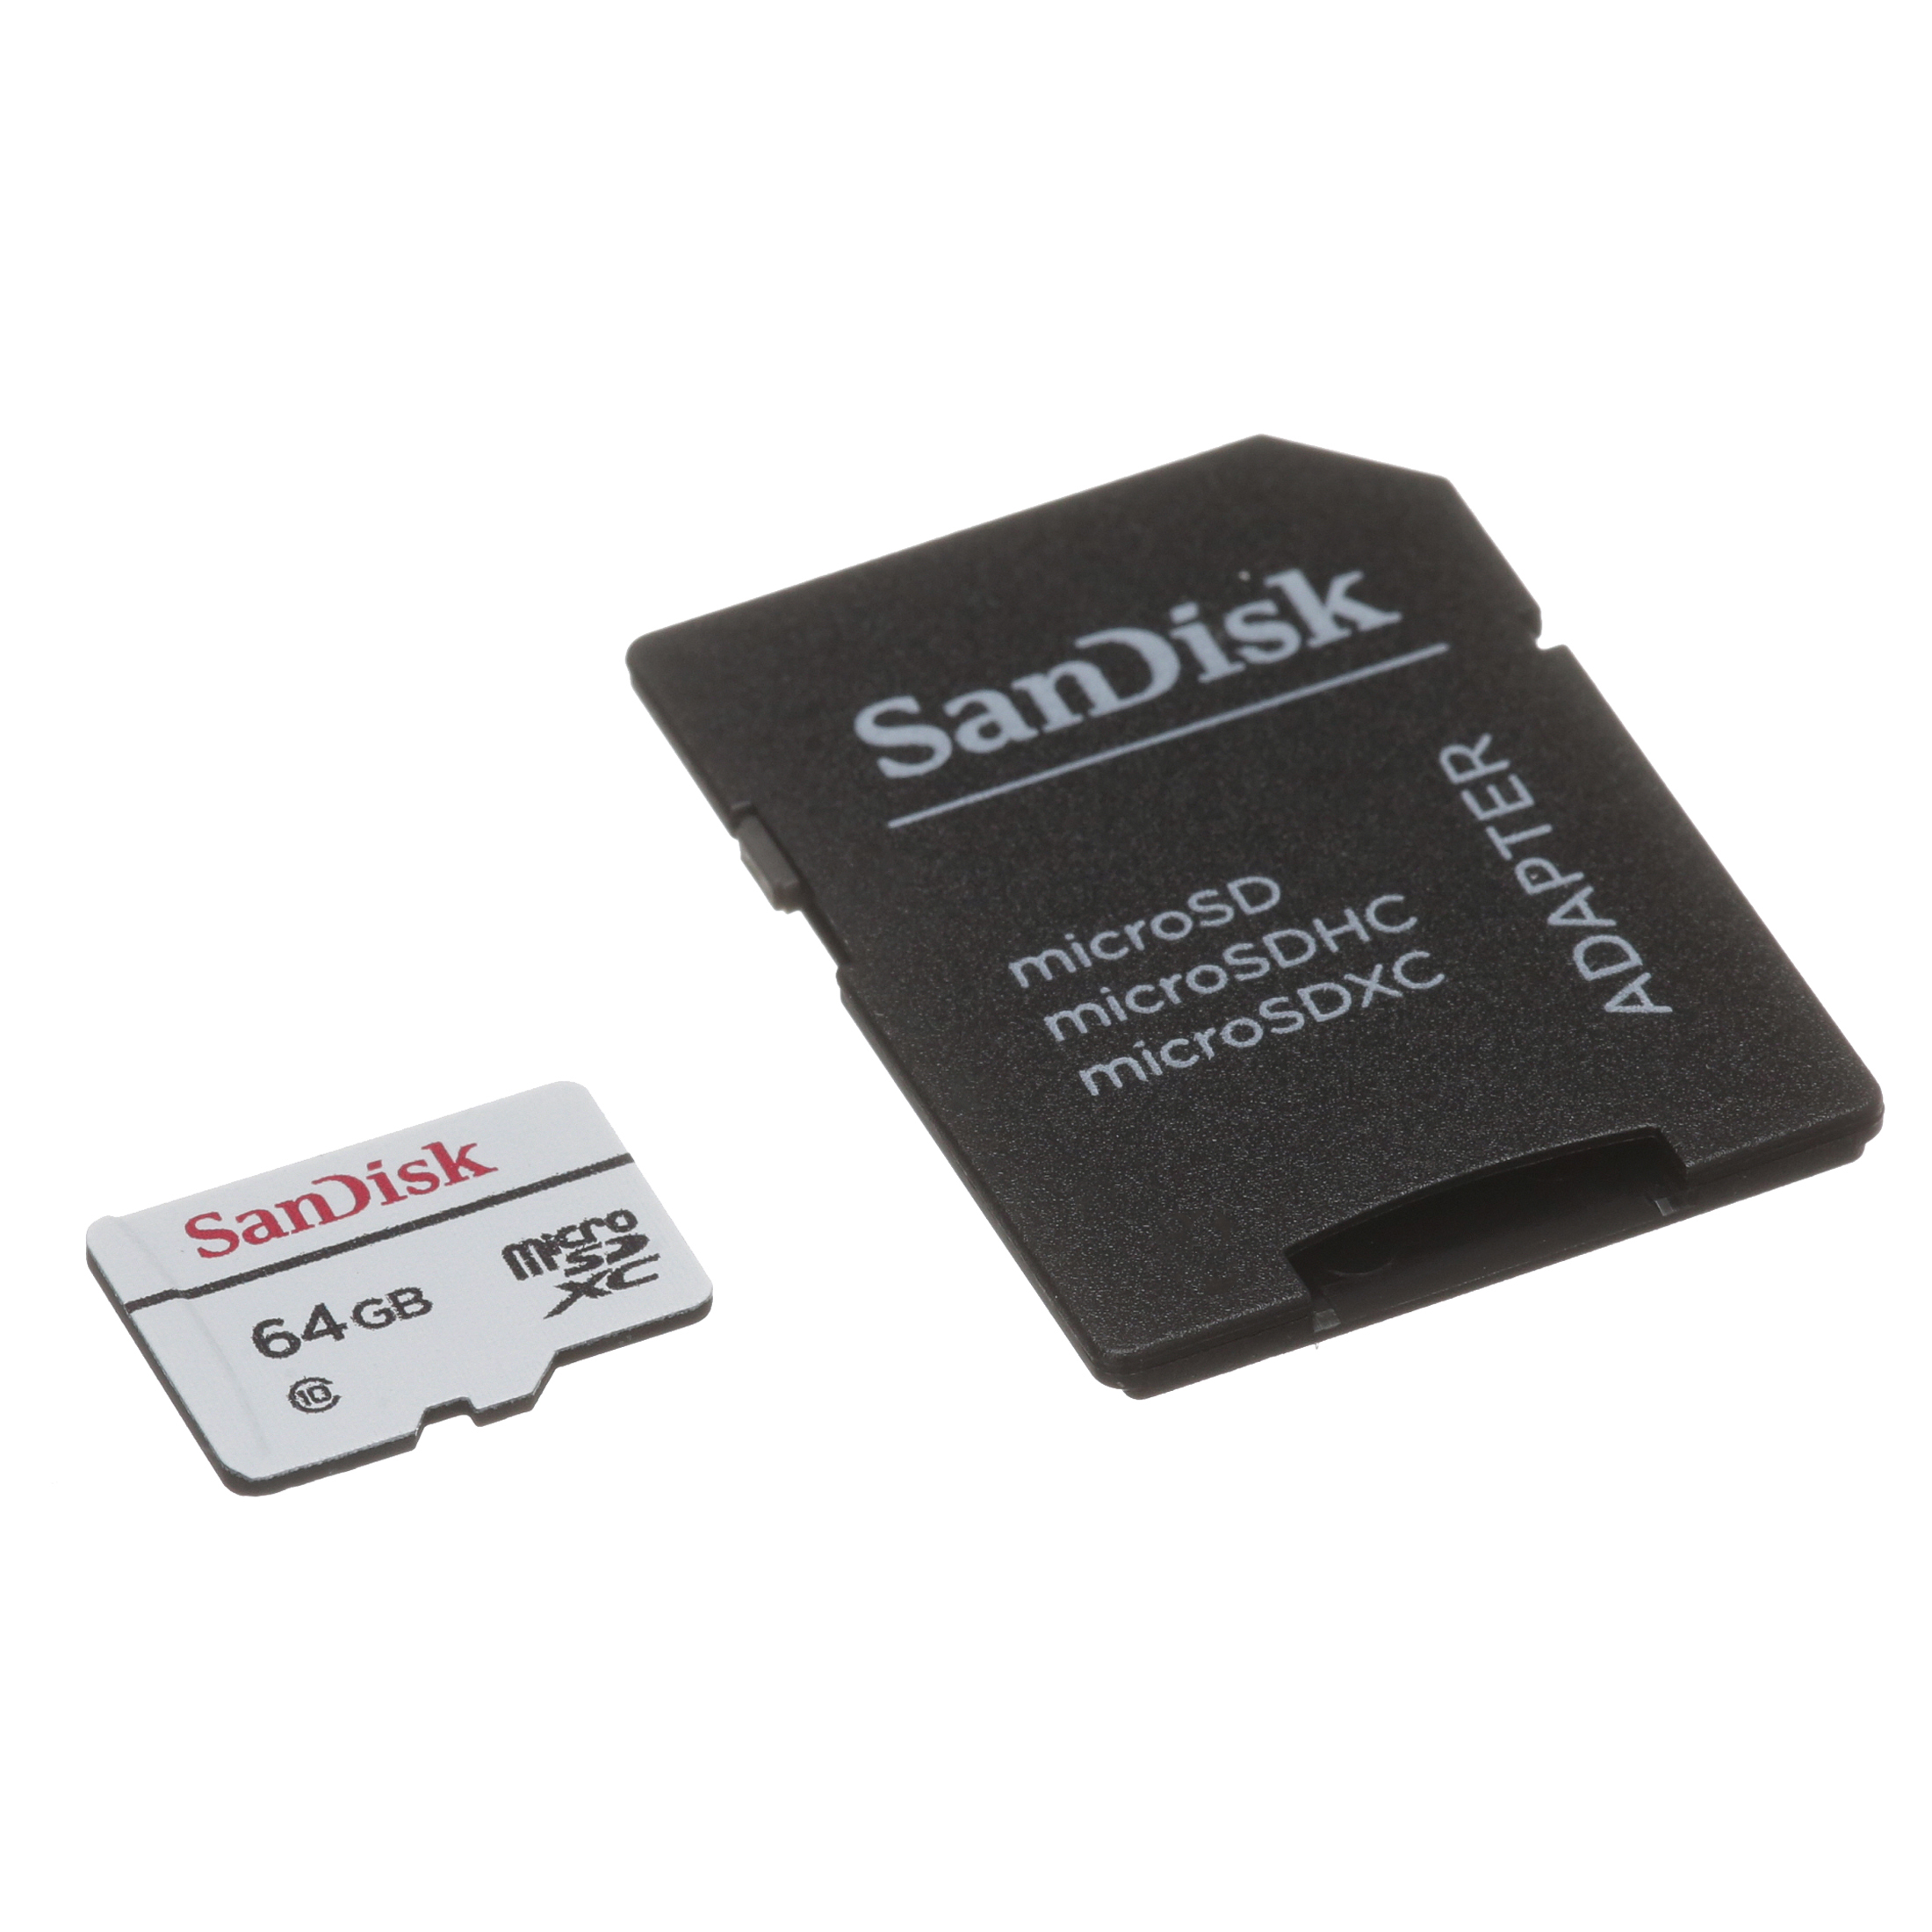 SanDisk 64GB microSDXC High Endurance Video Monitoring Card with Adapter - C10, Full HD, Micro SD Card - SDSDQQ-064G-G46A - image 5 of 8